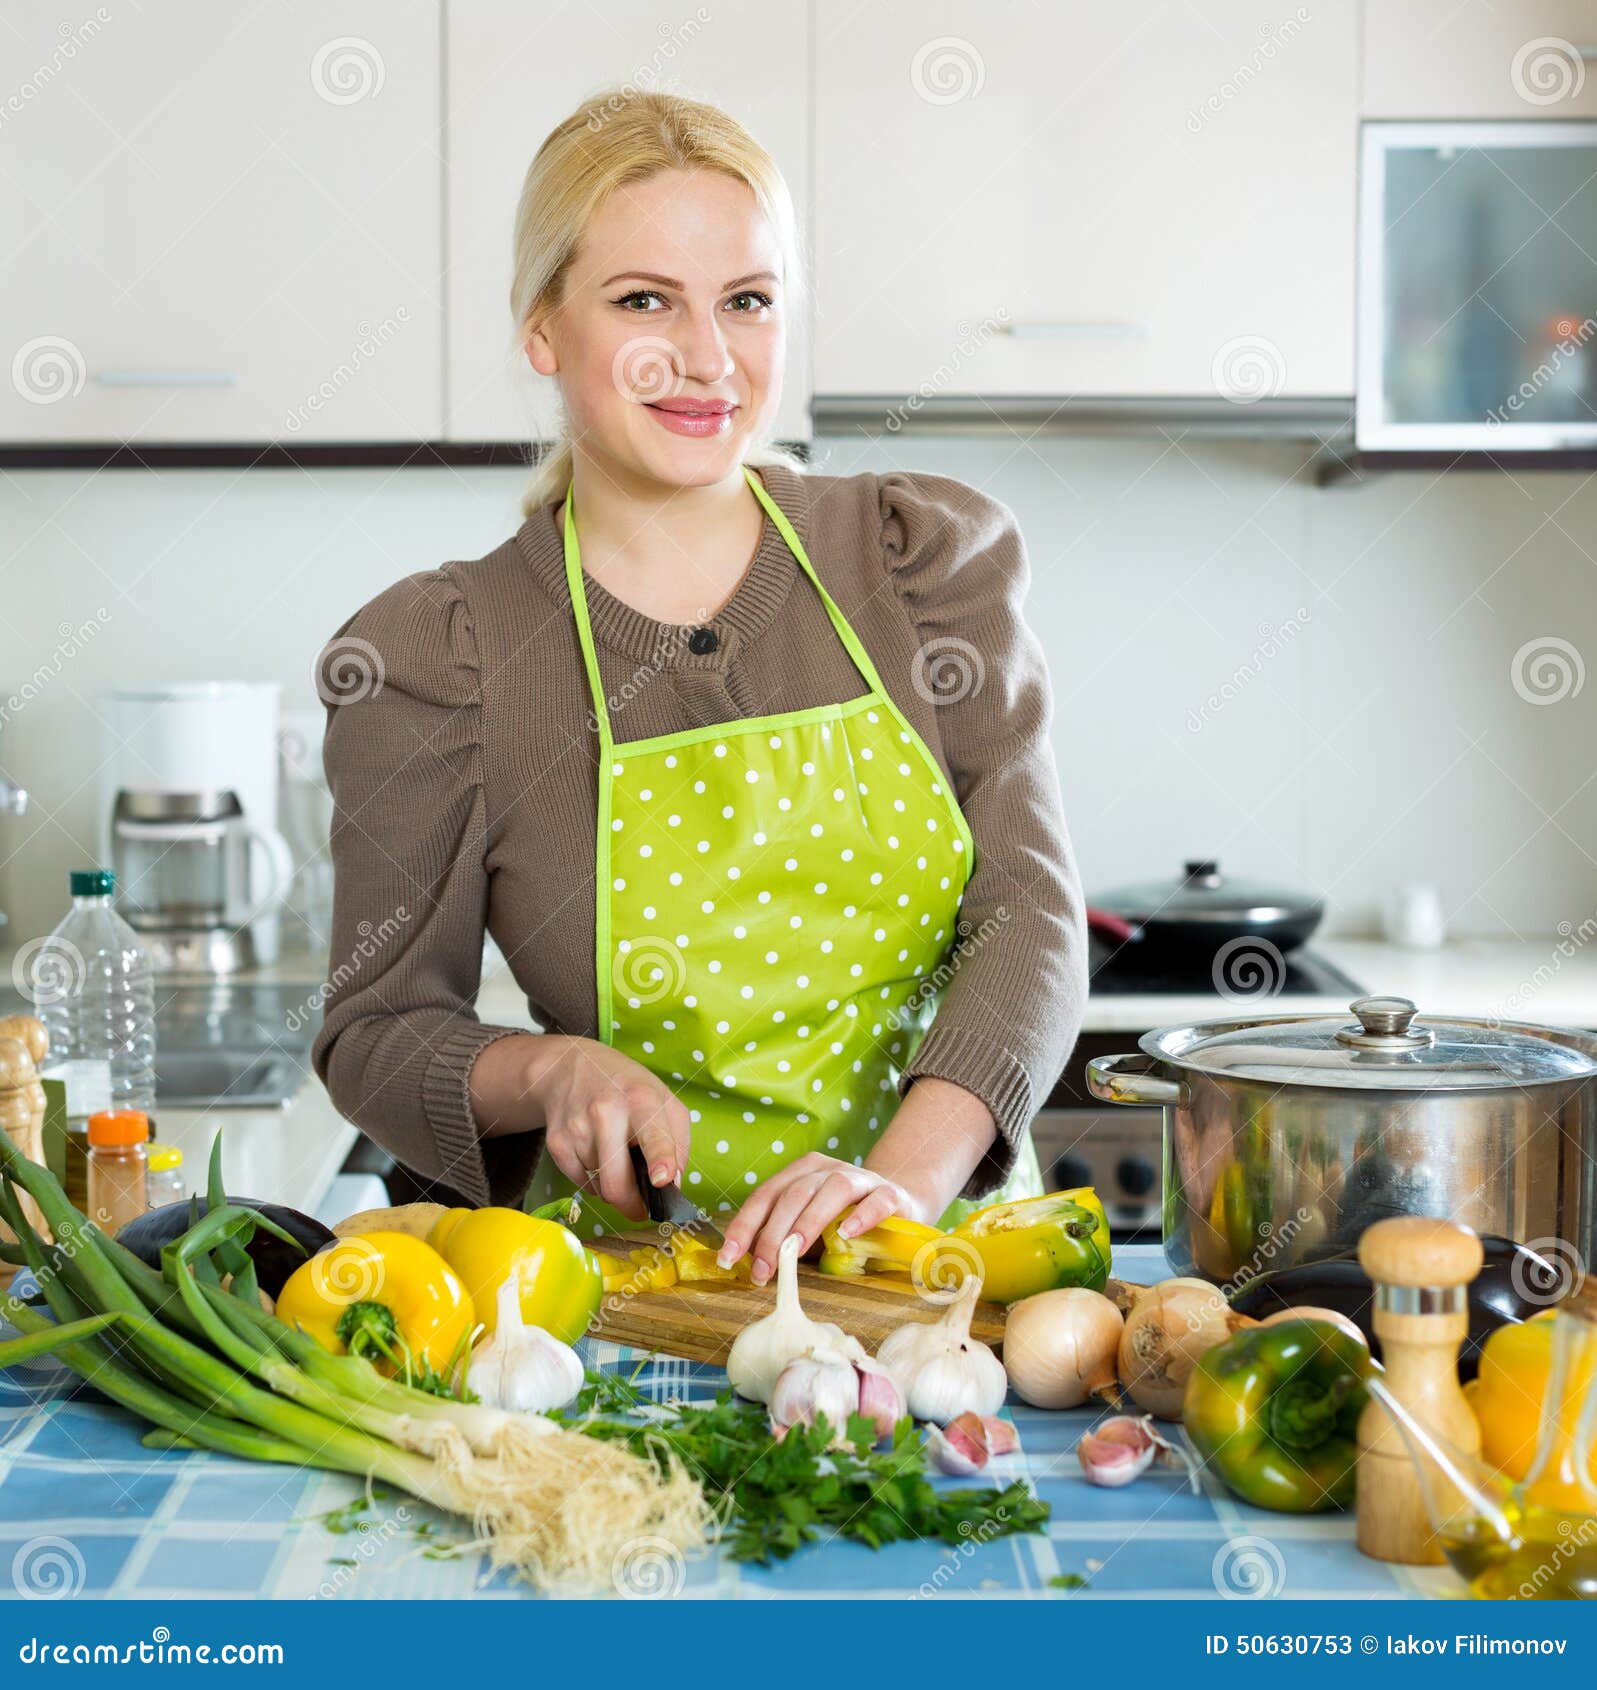 Young woman in an apron in her kitchen taking food out of 